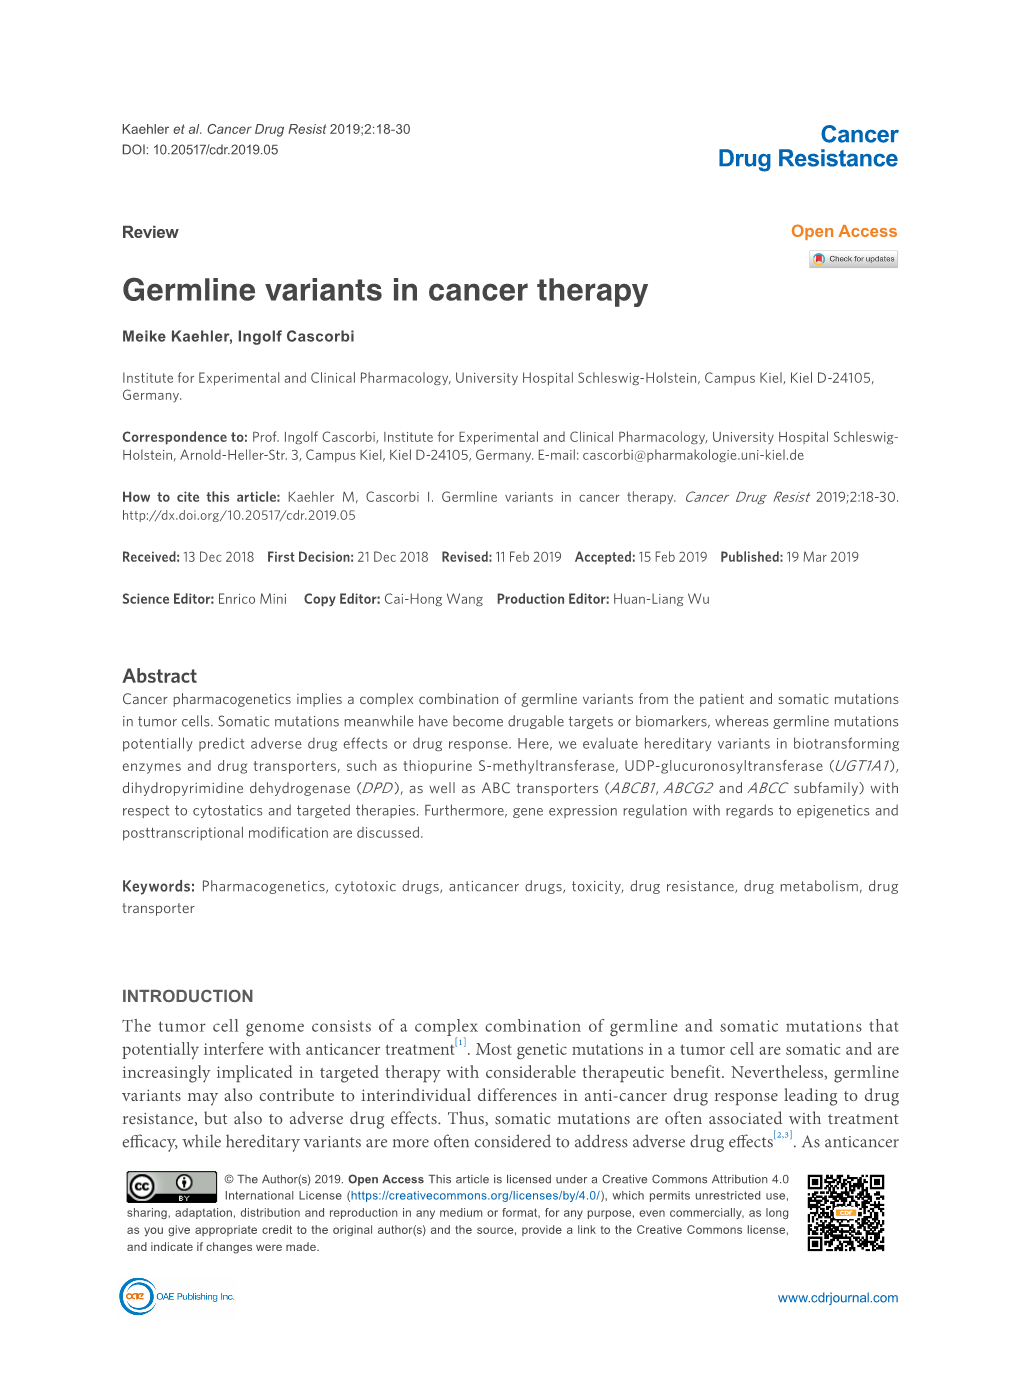 Germline Variants in Cancer Therapy